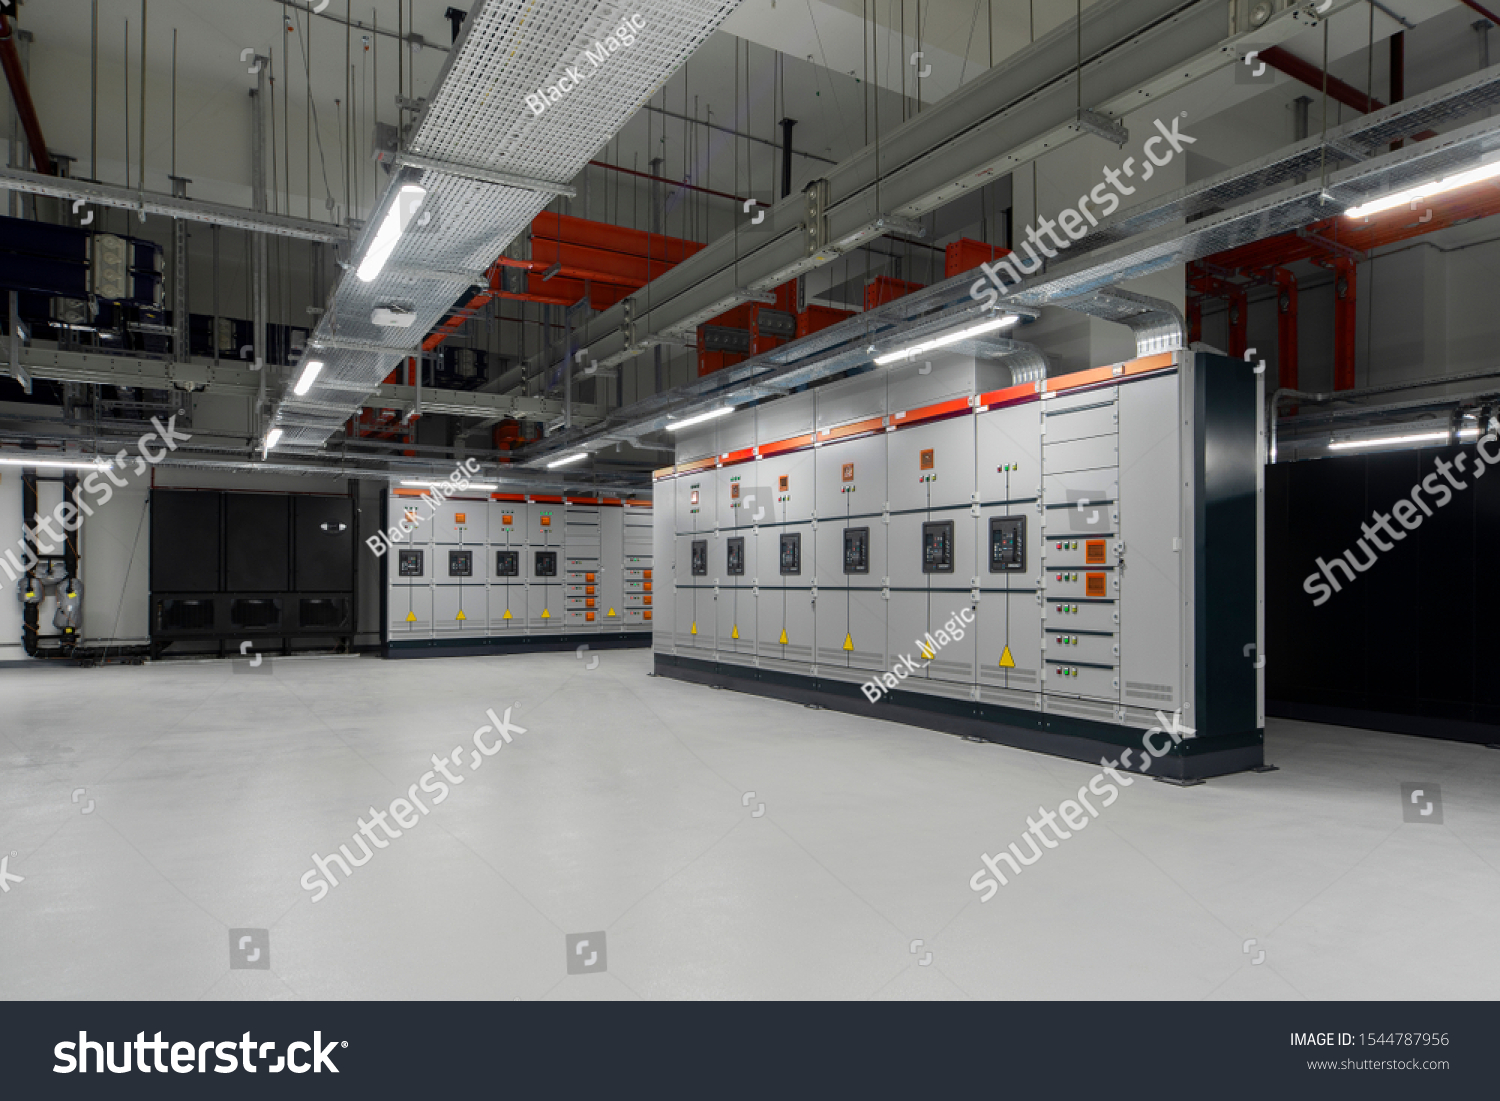 Low voltage switchboard. Electrical switch panel of switchgear room at power plant. #1544787956